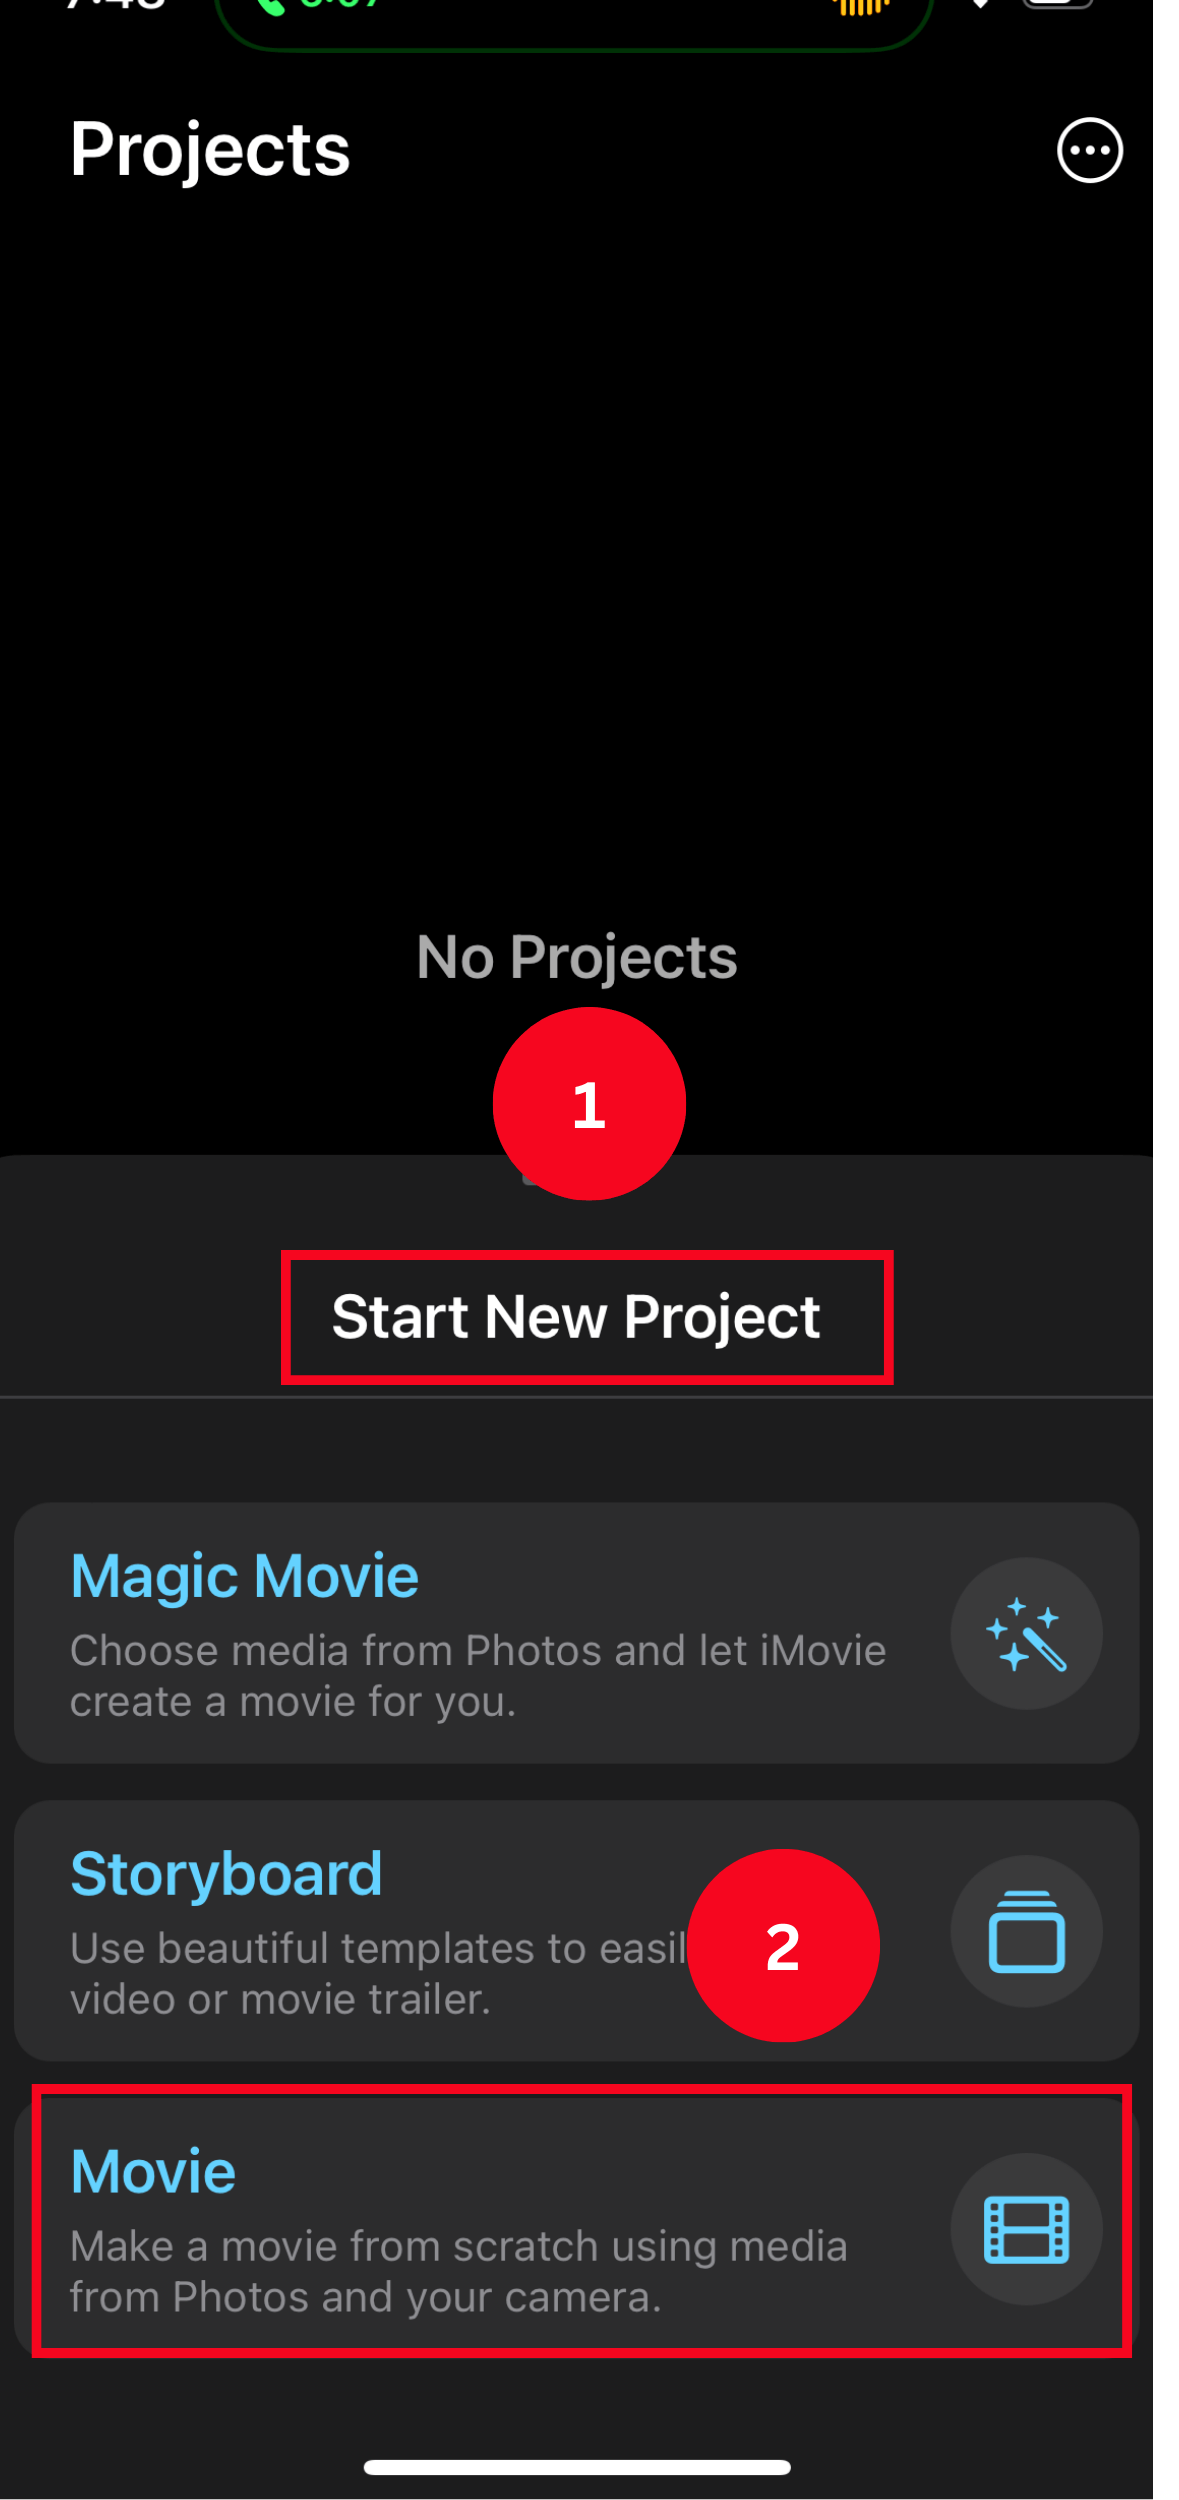 Click Start New Project followed by Movie